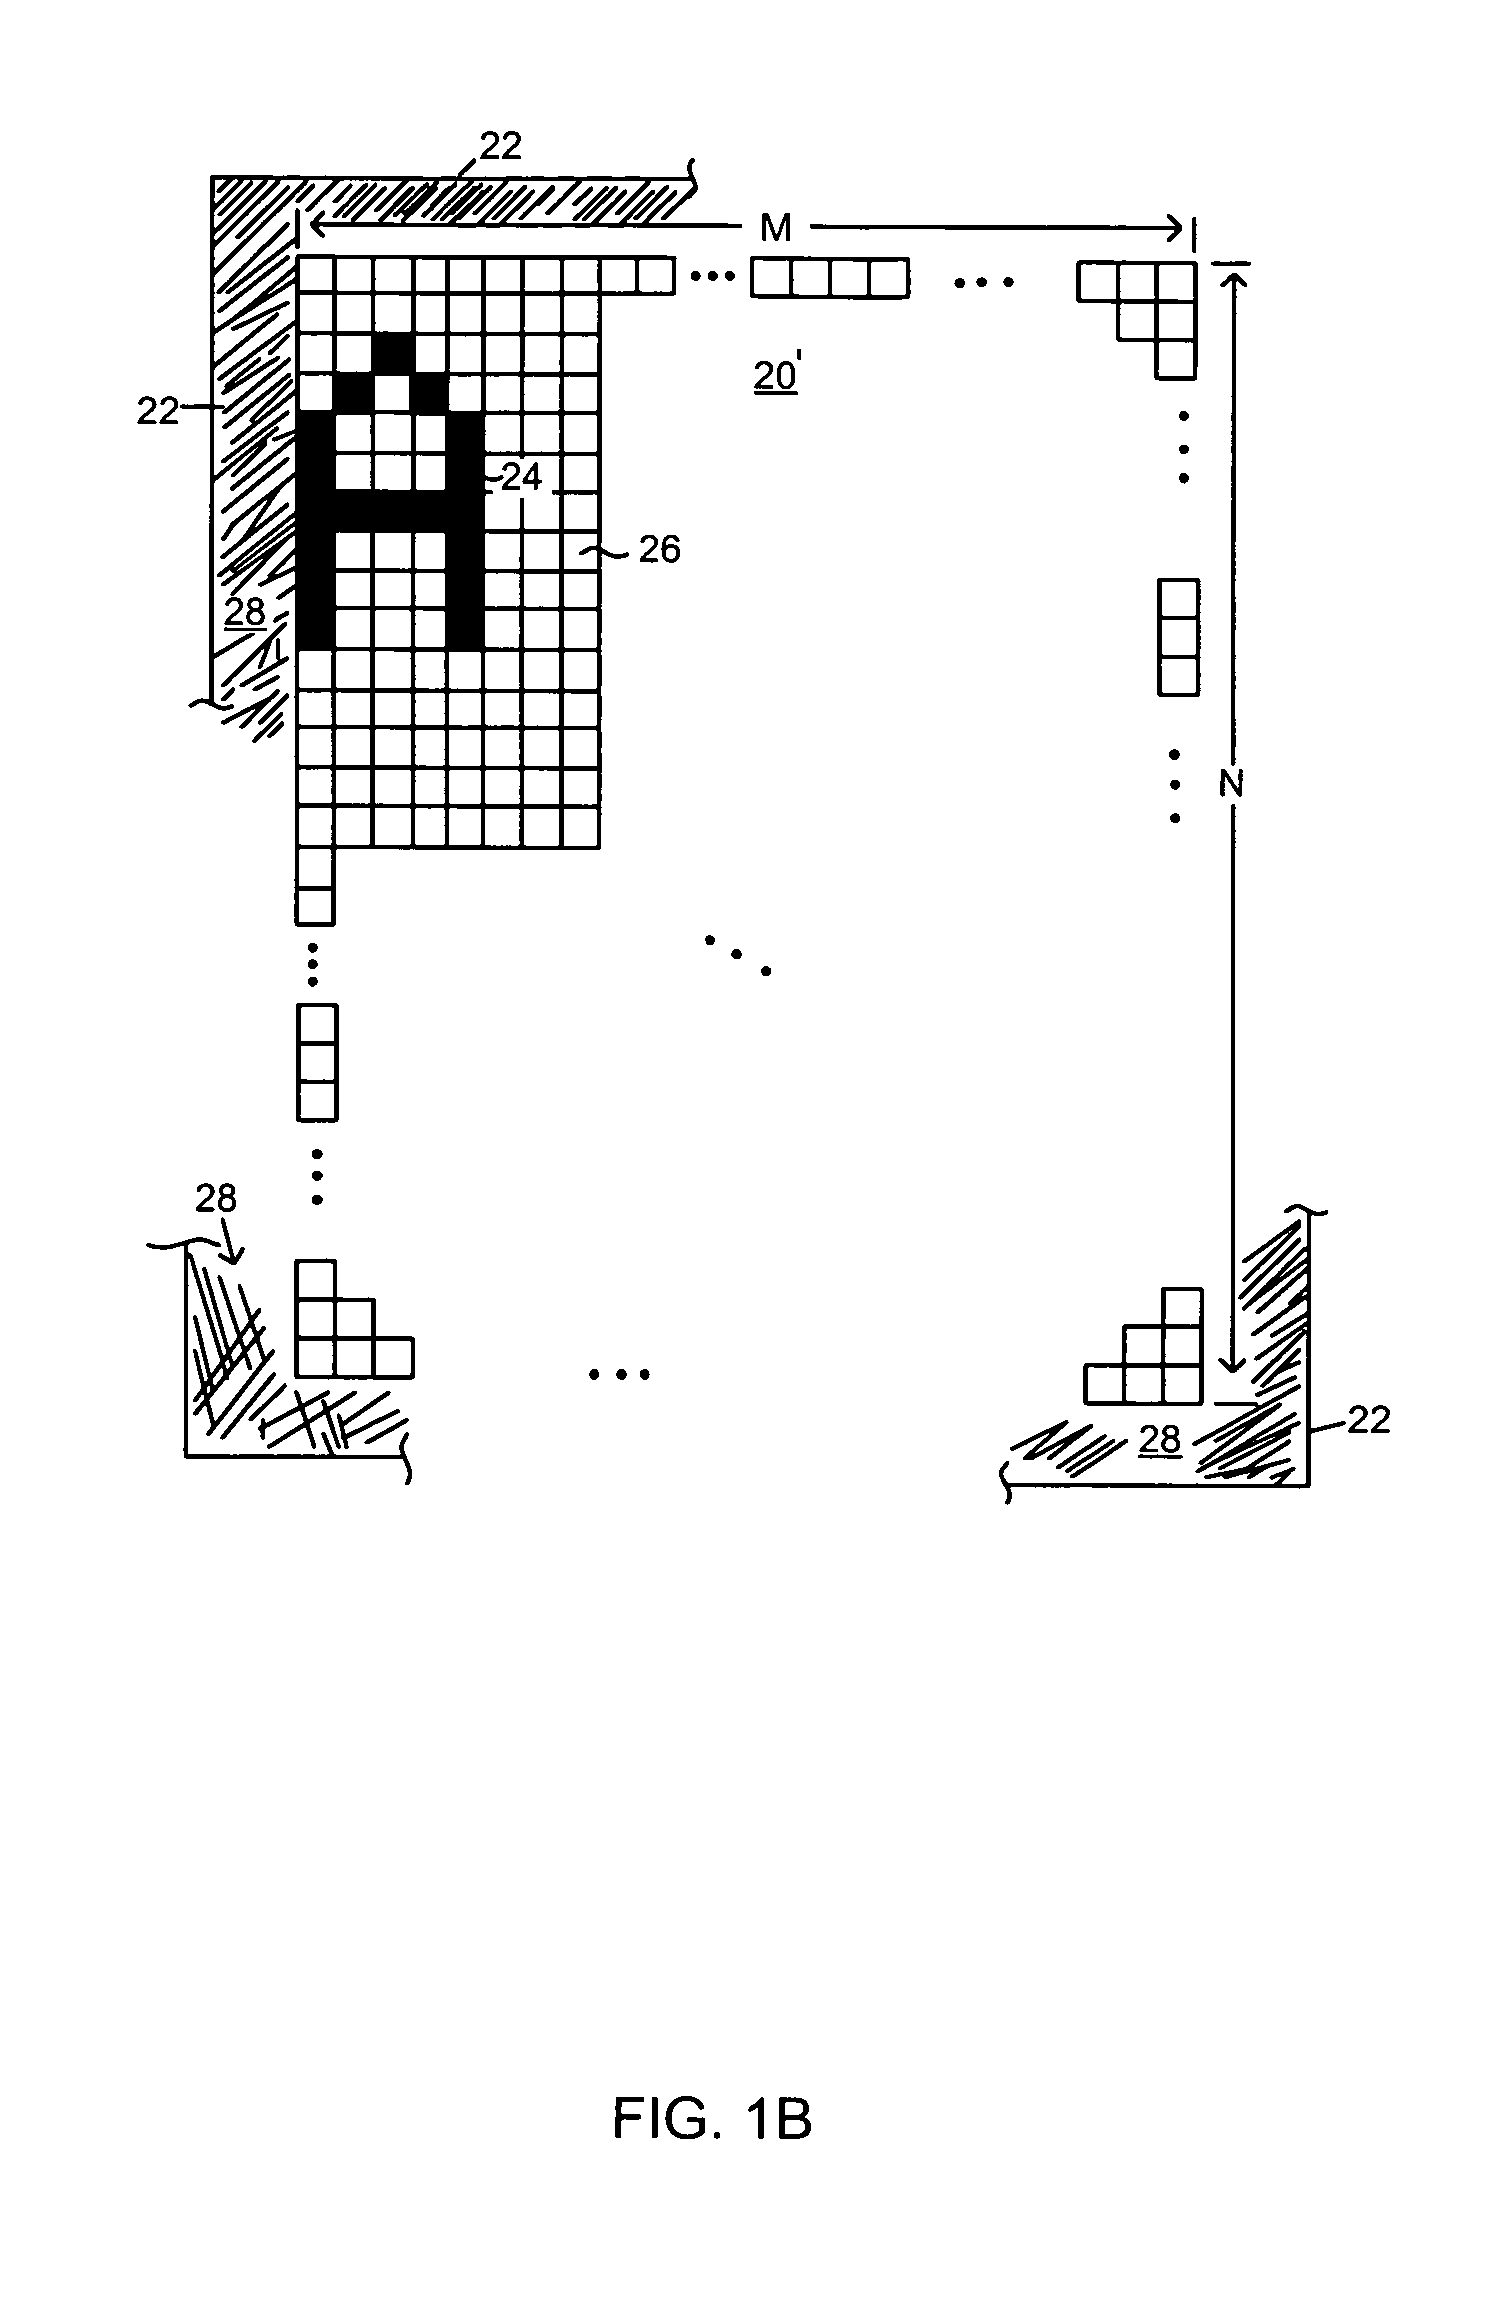 Controllable pixel border for a negative mode passive matrix display device